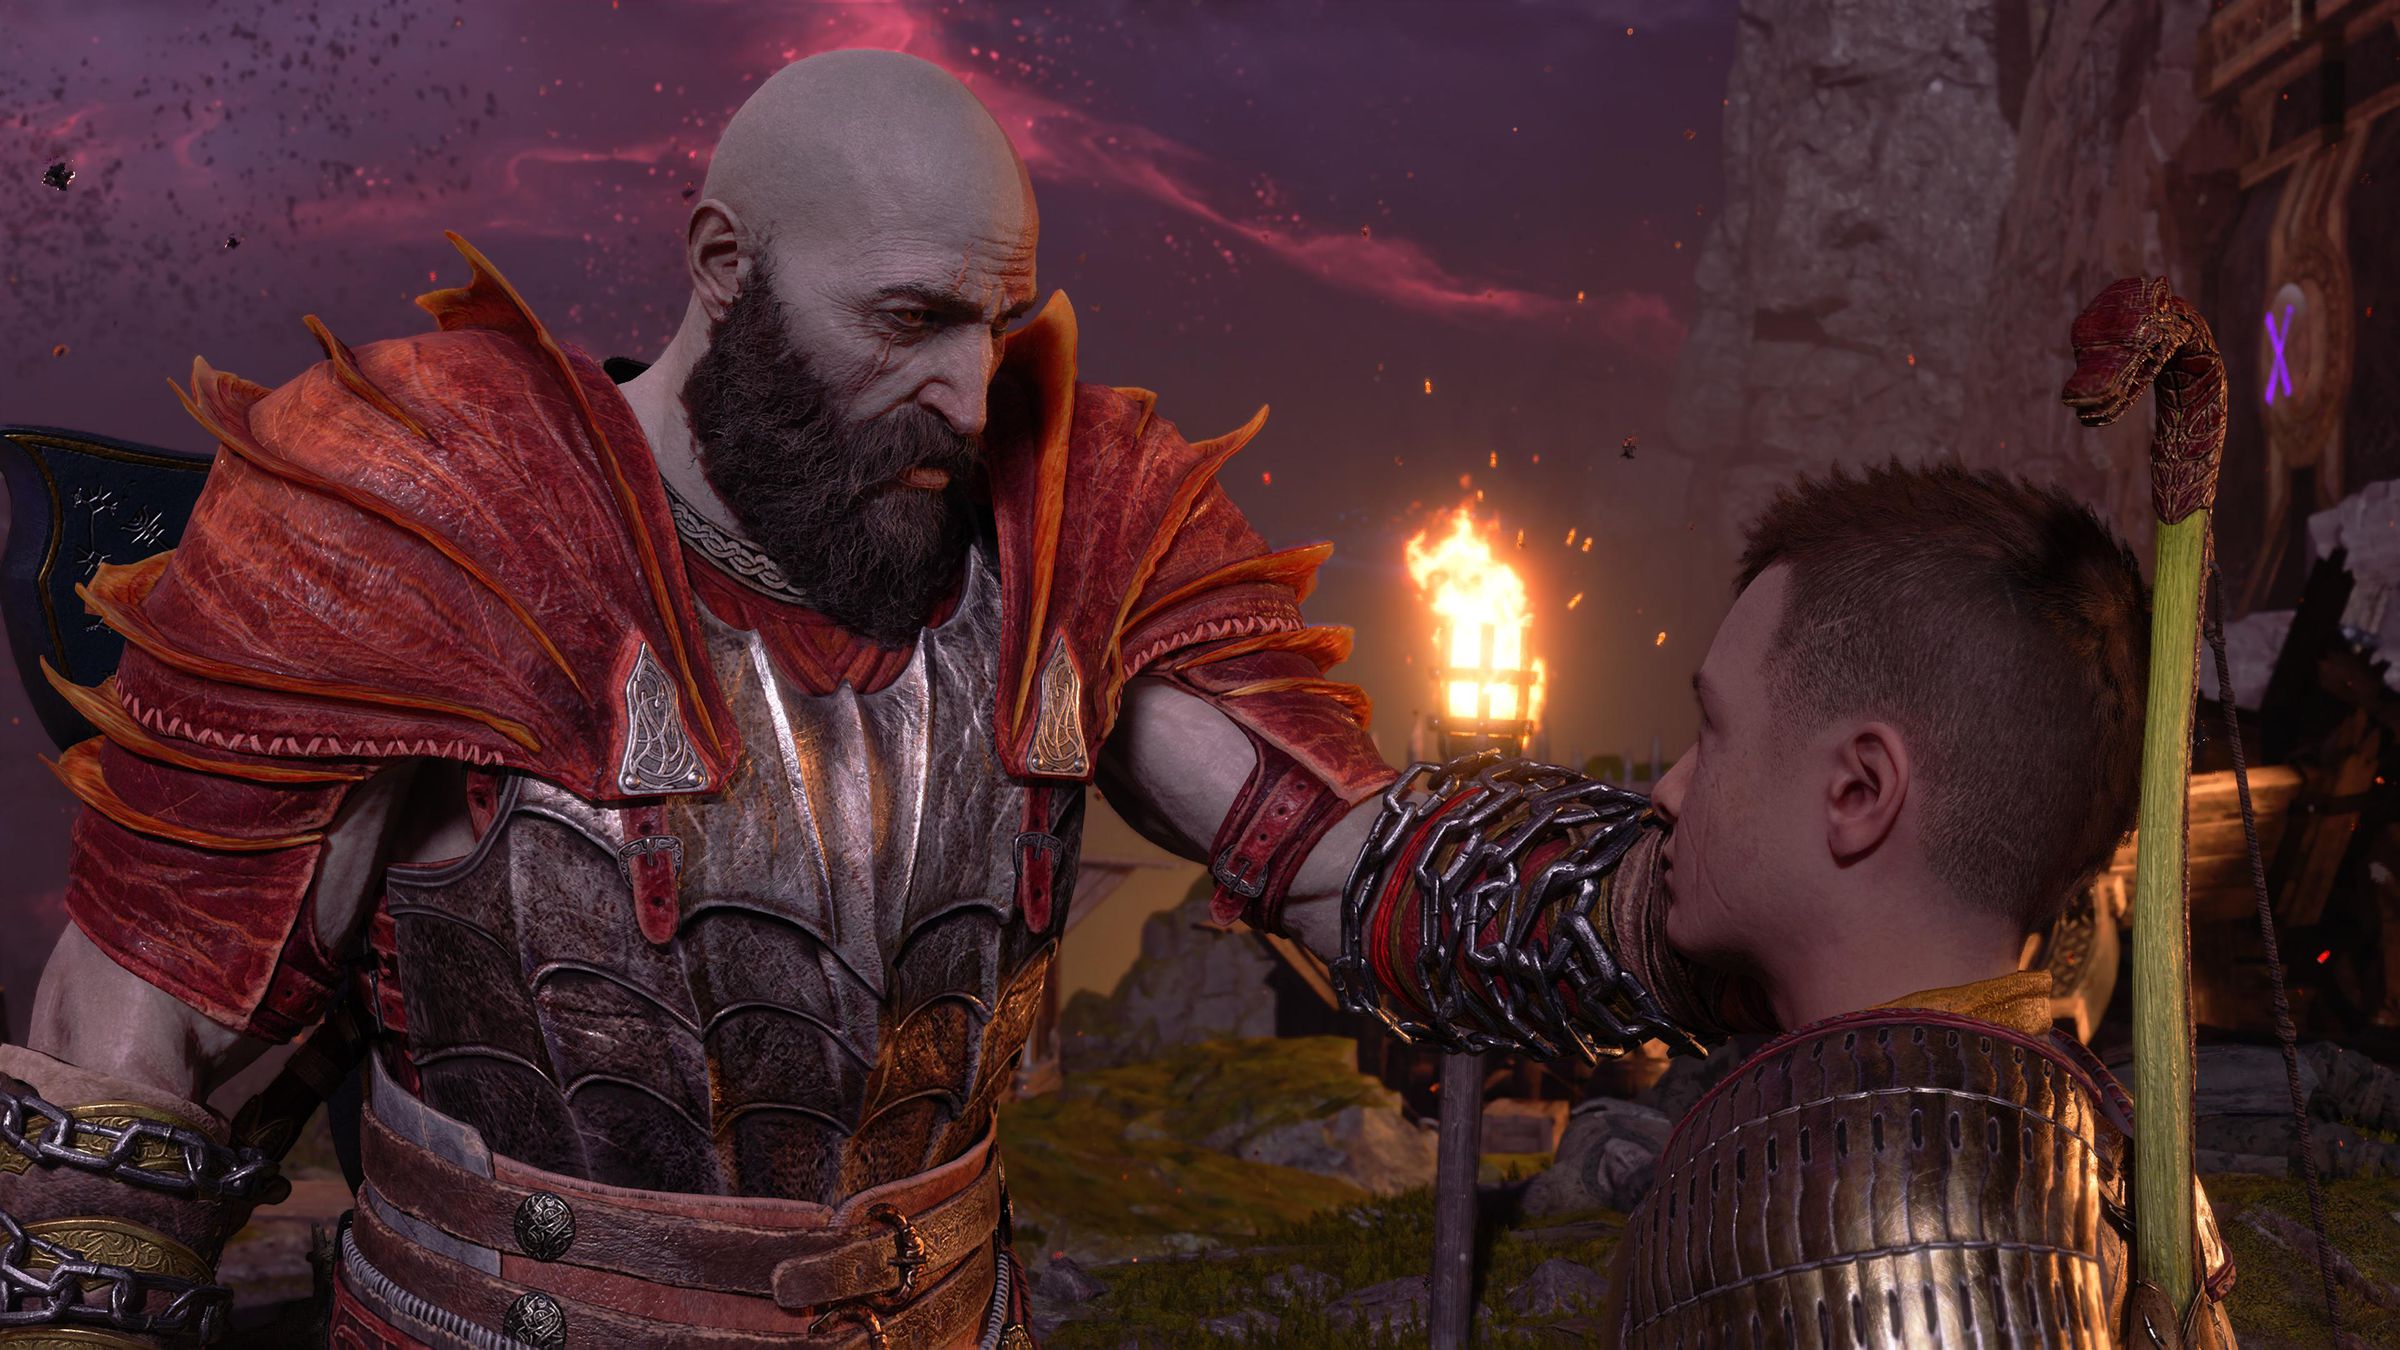 A screenshot from God of War Ragnarök featuring Kratos gently touching the face of his son, Atreus, comfortably